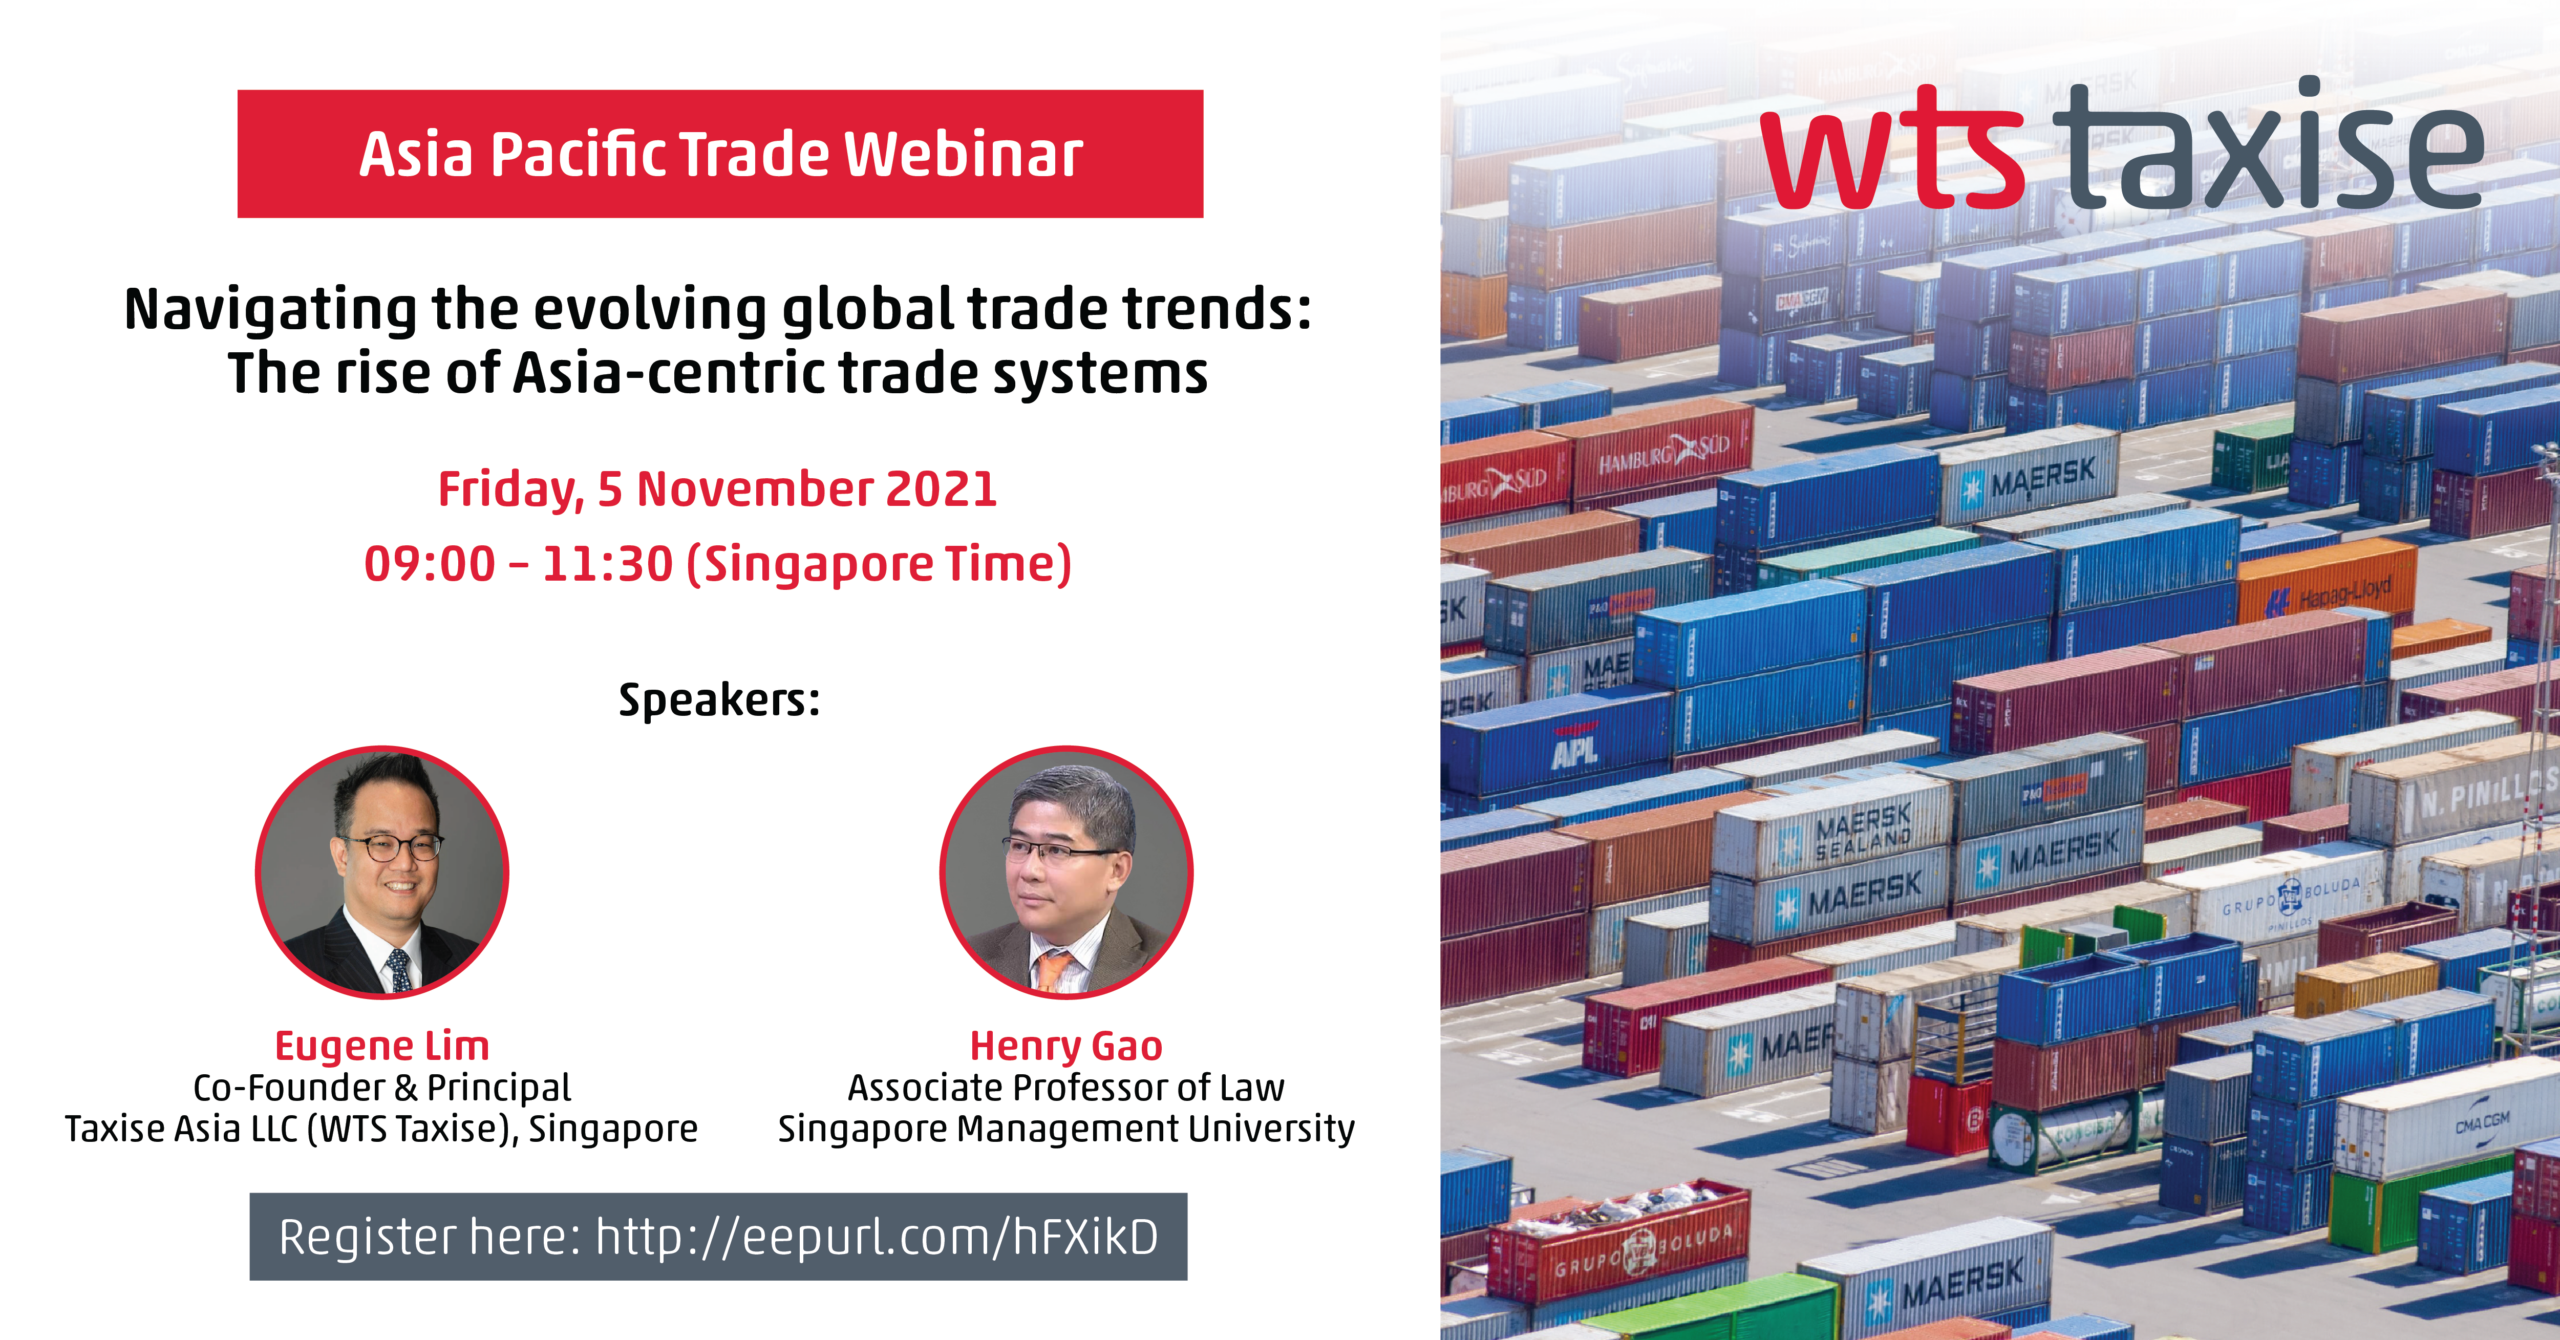 Navigating the evolving global trade trends: The rise of Asia-centric trade systems